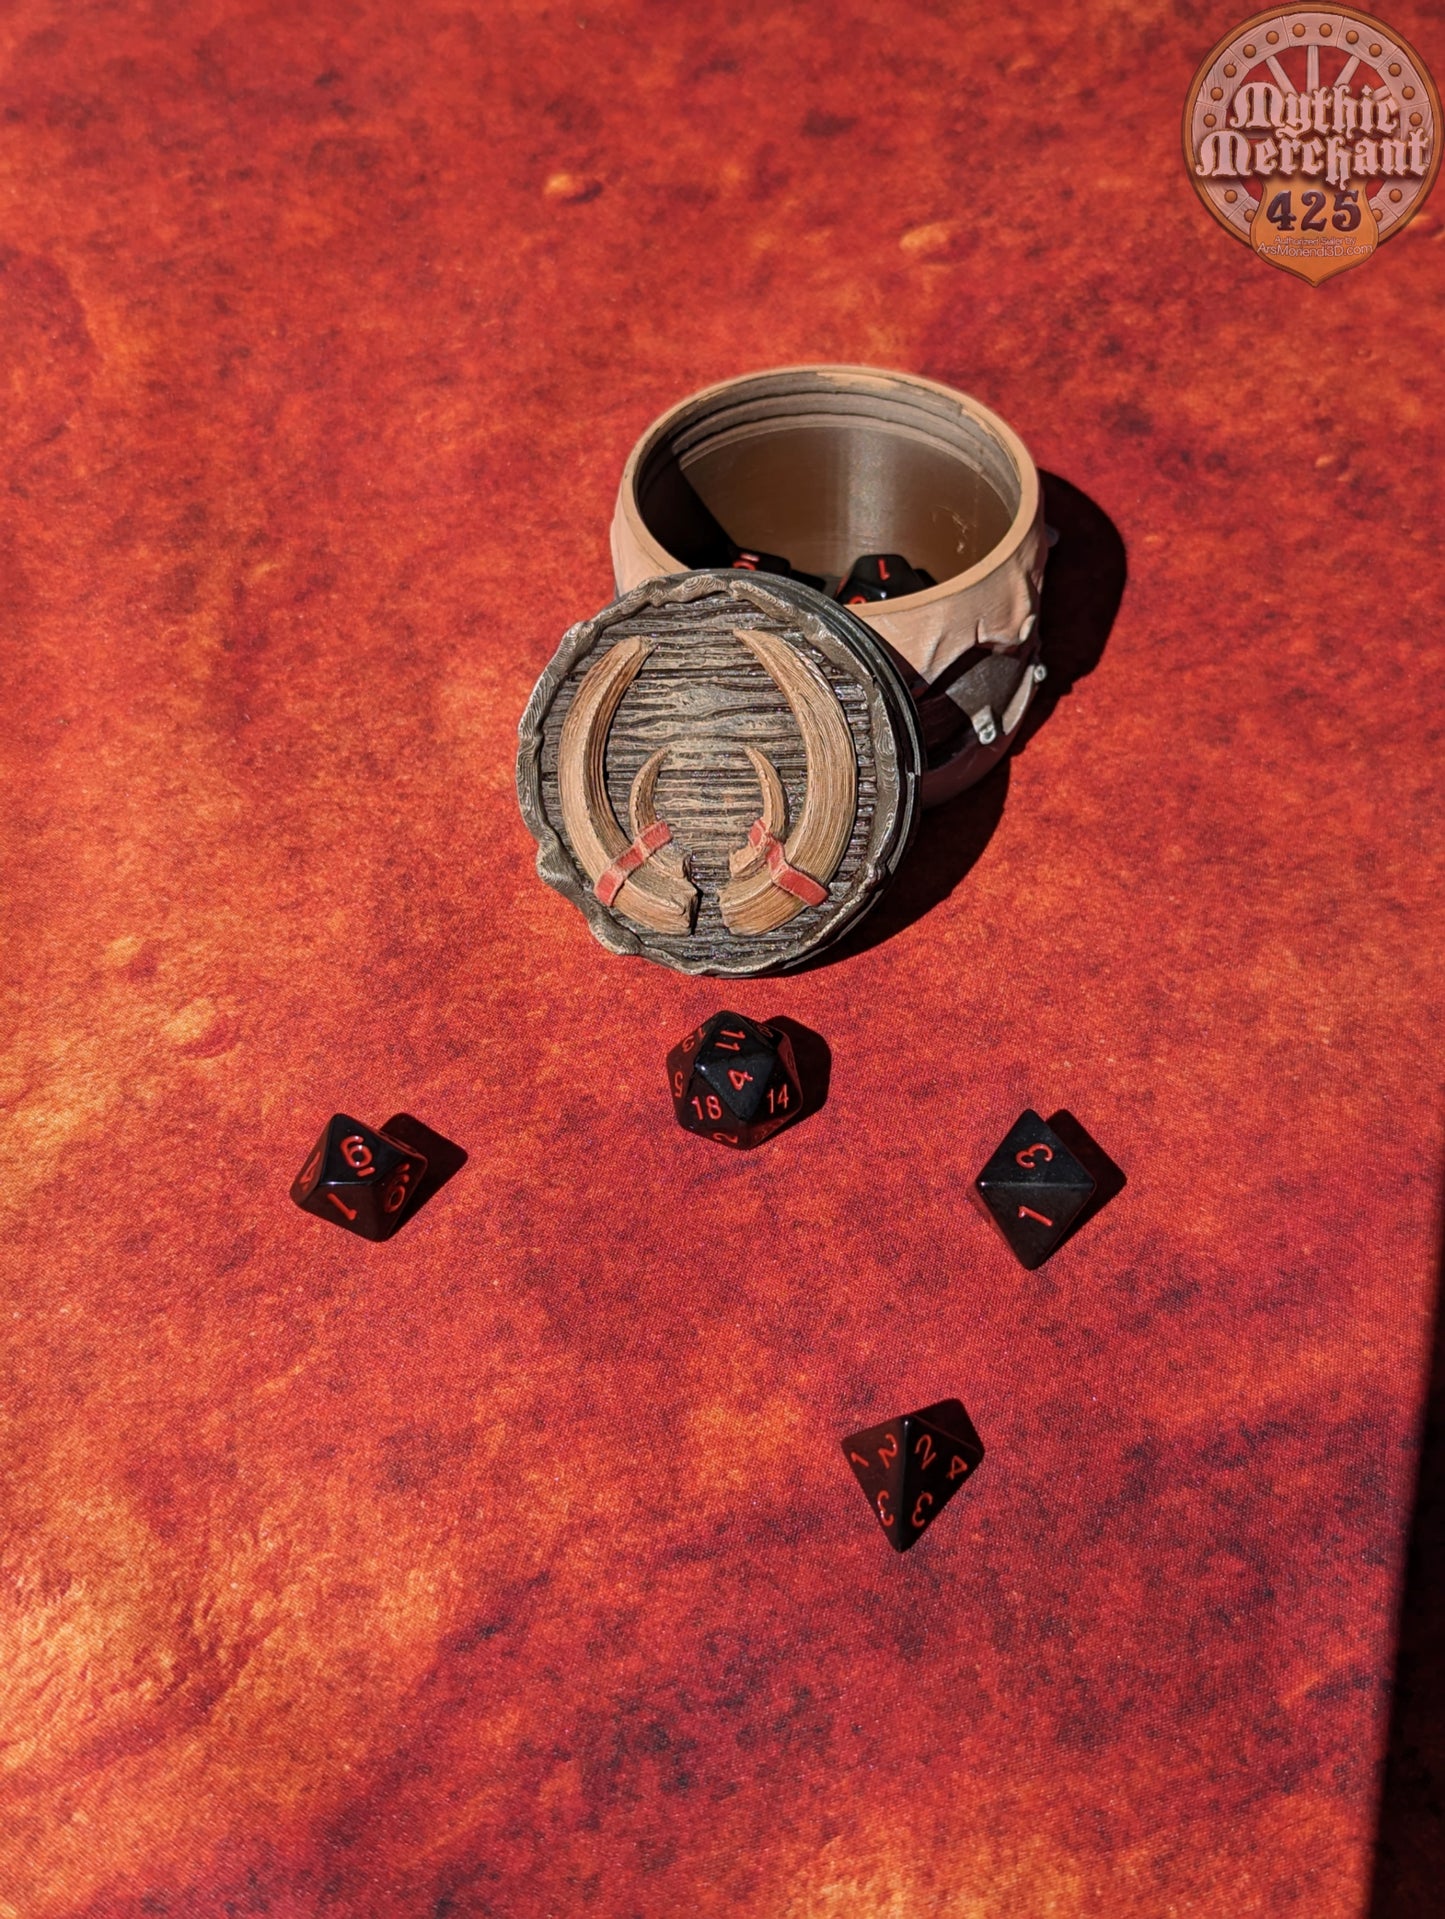 Barbarian Class 3D Printed D20 Dice Vault | Table Coaster & Dice Jail | DnD Player Gift | Mythic Mugs by Ars Moriendi 3D - Unleash the fury!